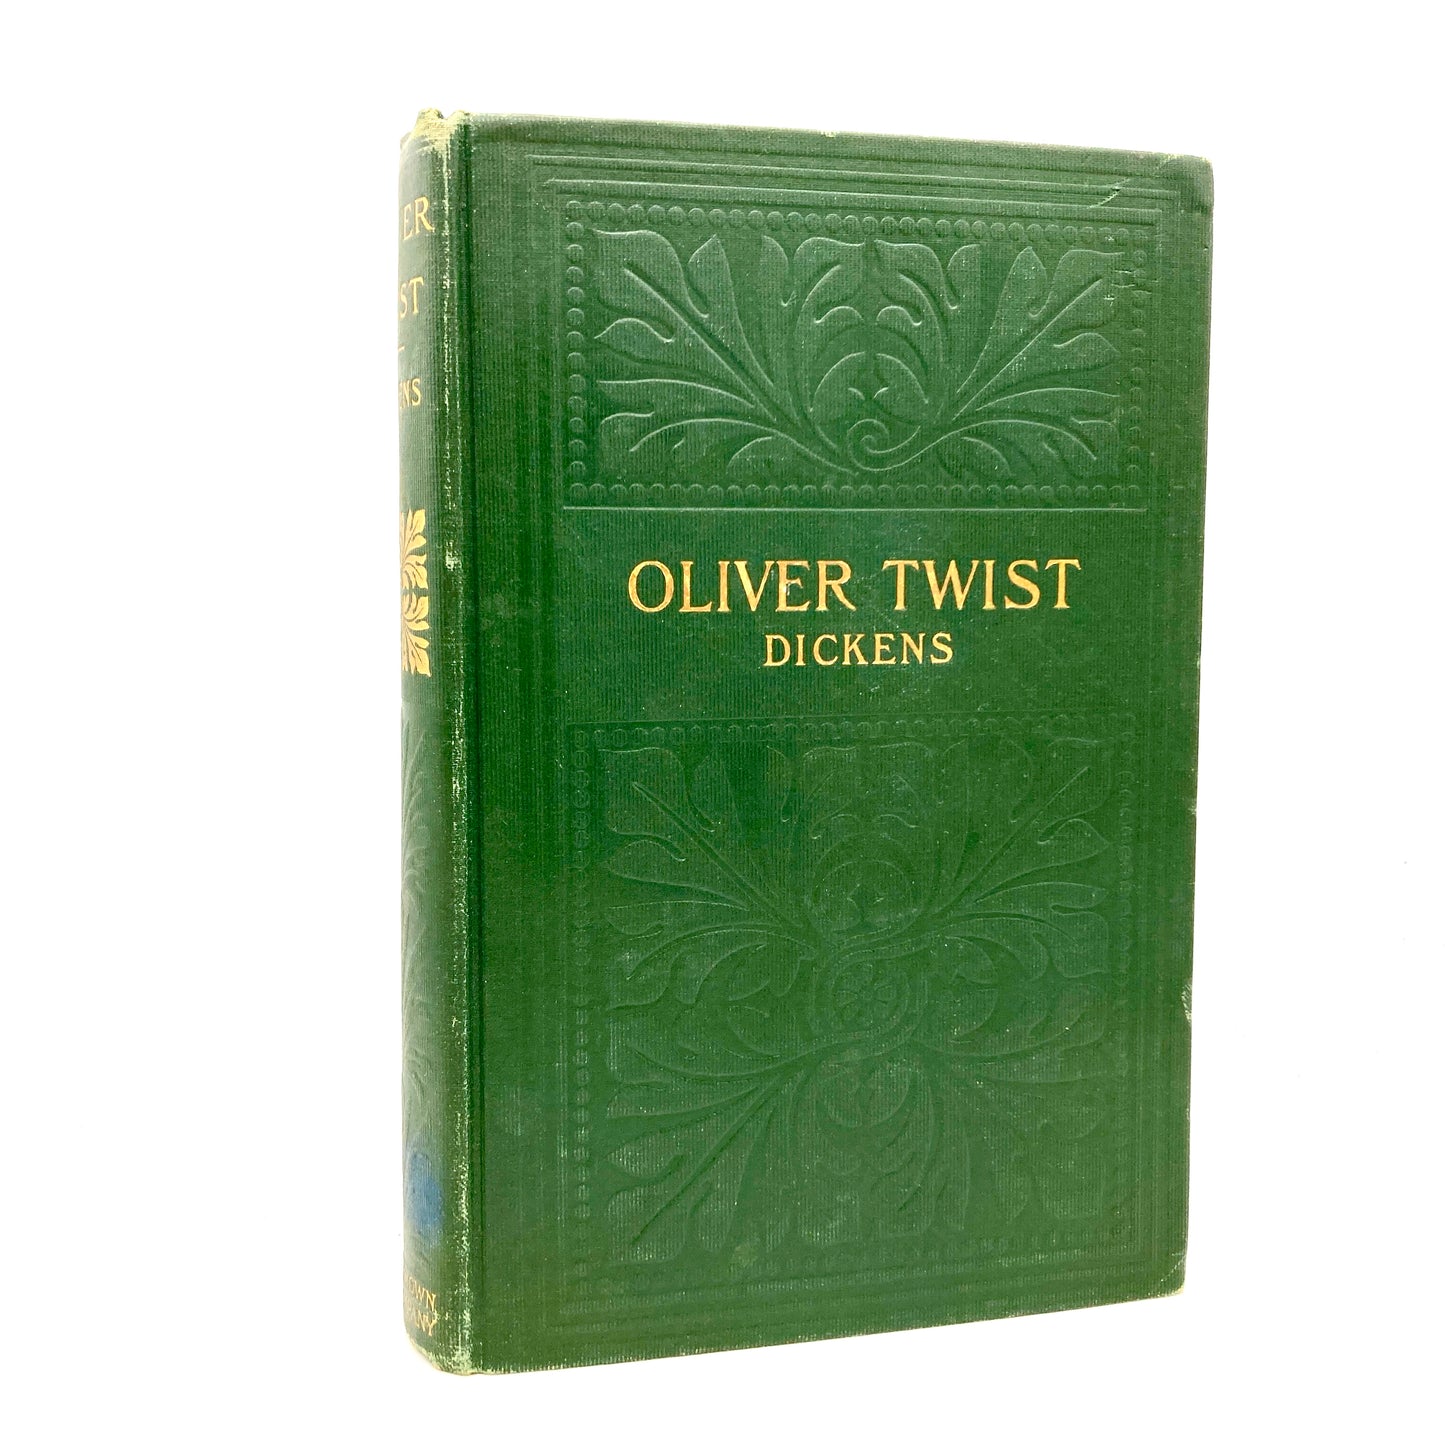 DICKENS, Charles "Oliver Twist" [Little, Brown & Co, c1900] - Buzz Bookstore